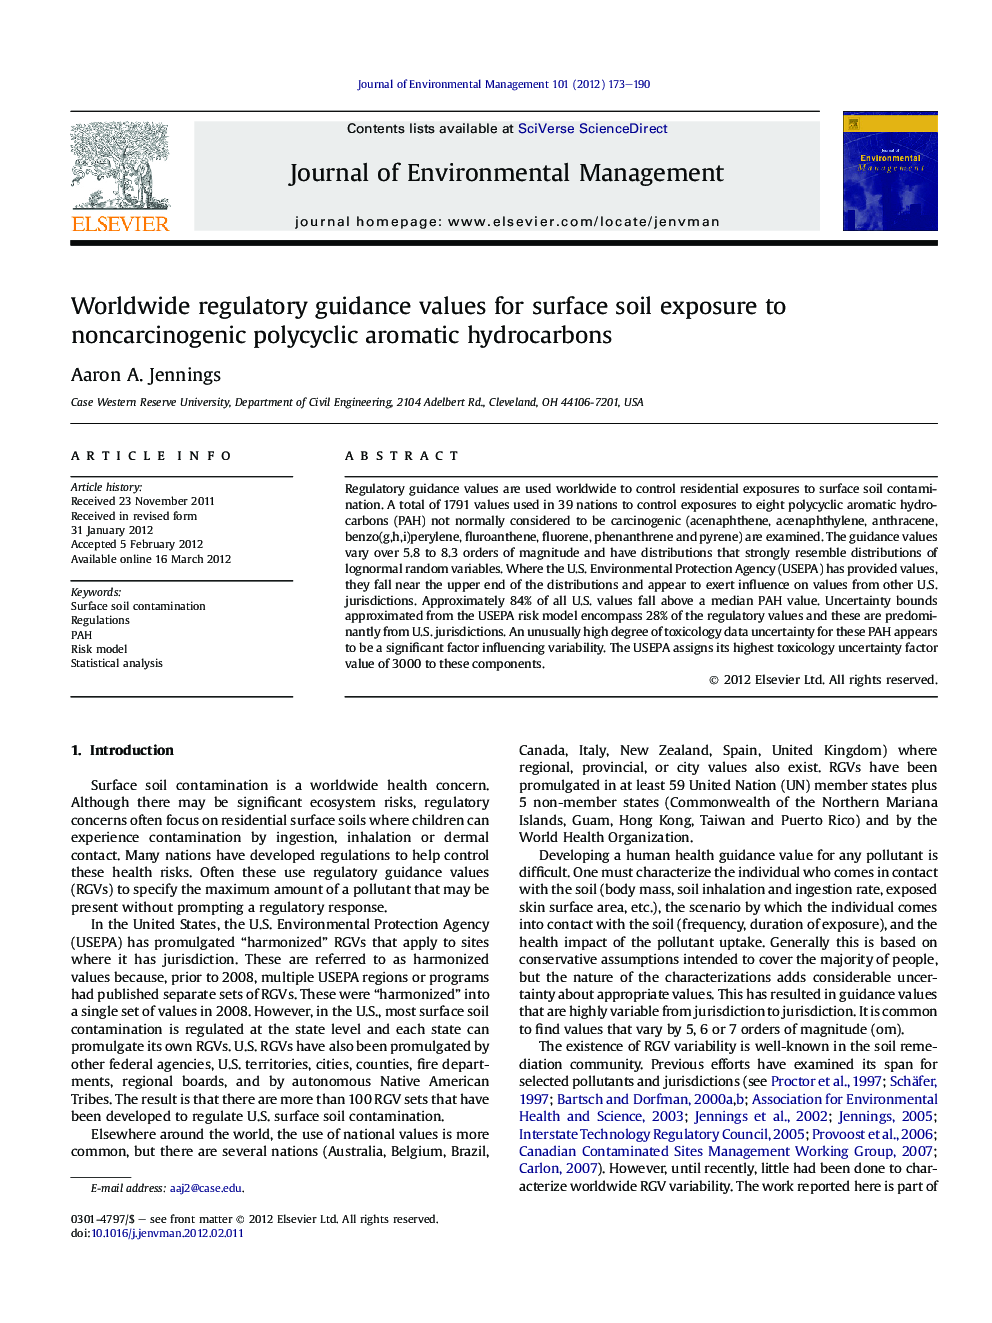 Worldwide regulatory guidance values for surface soil exposure to noncarcinogenic polycyclic aromatic hydrocarbons